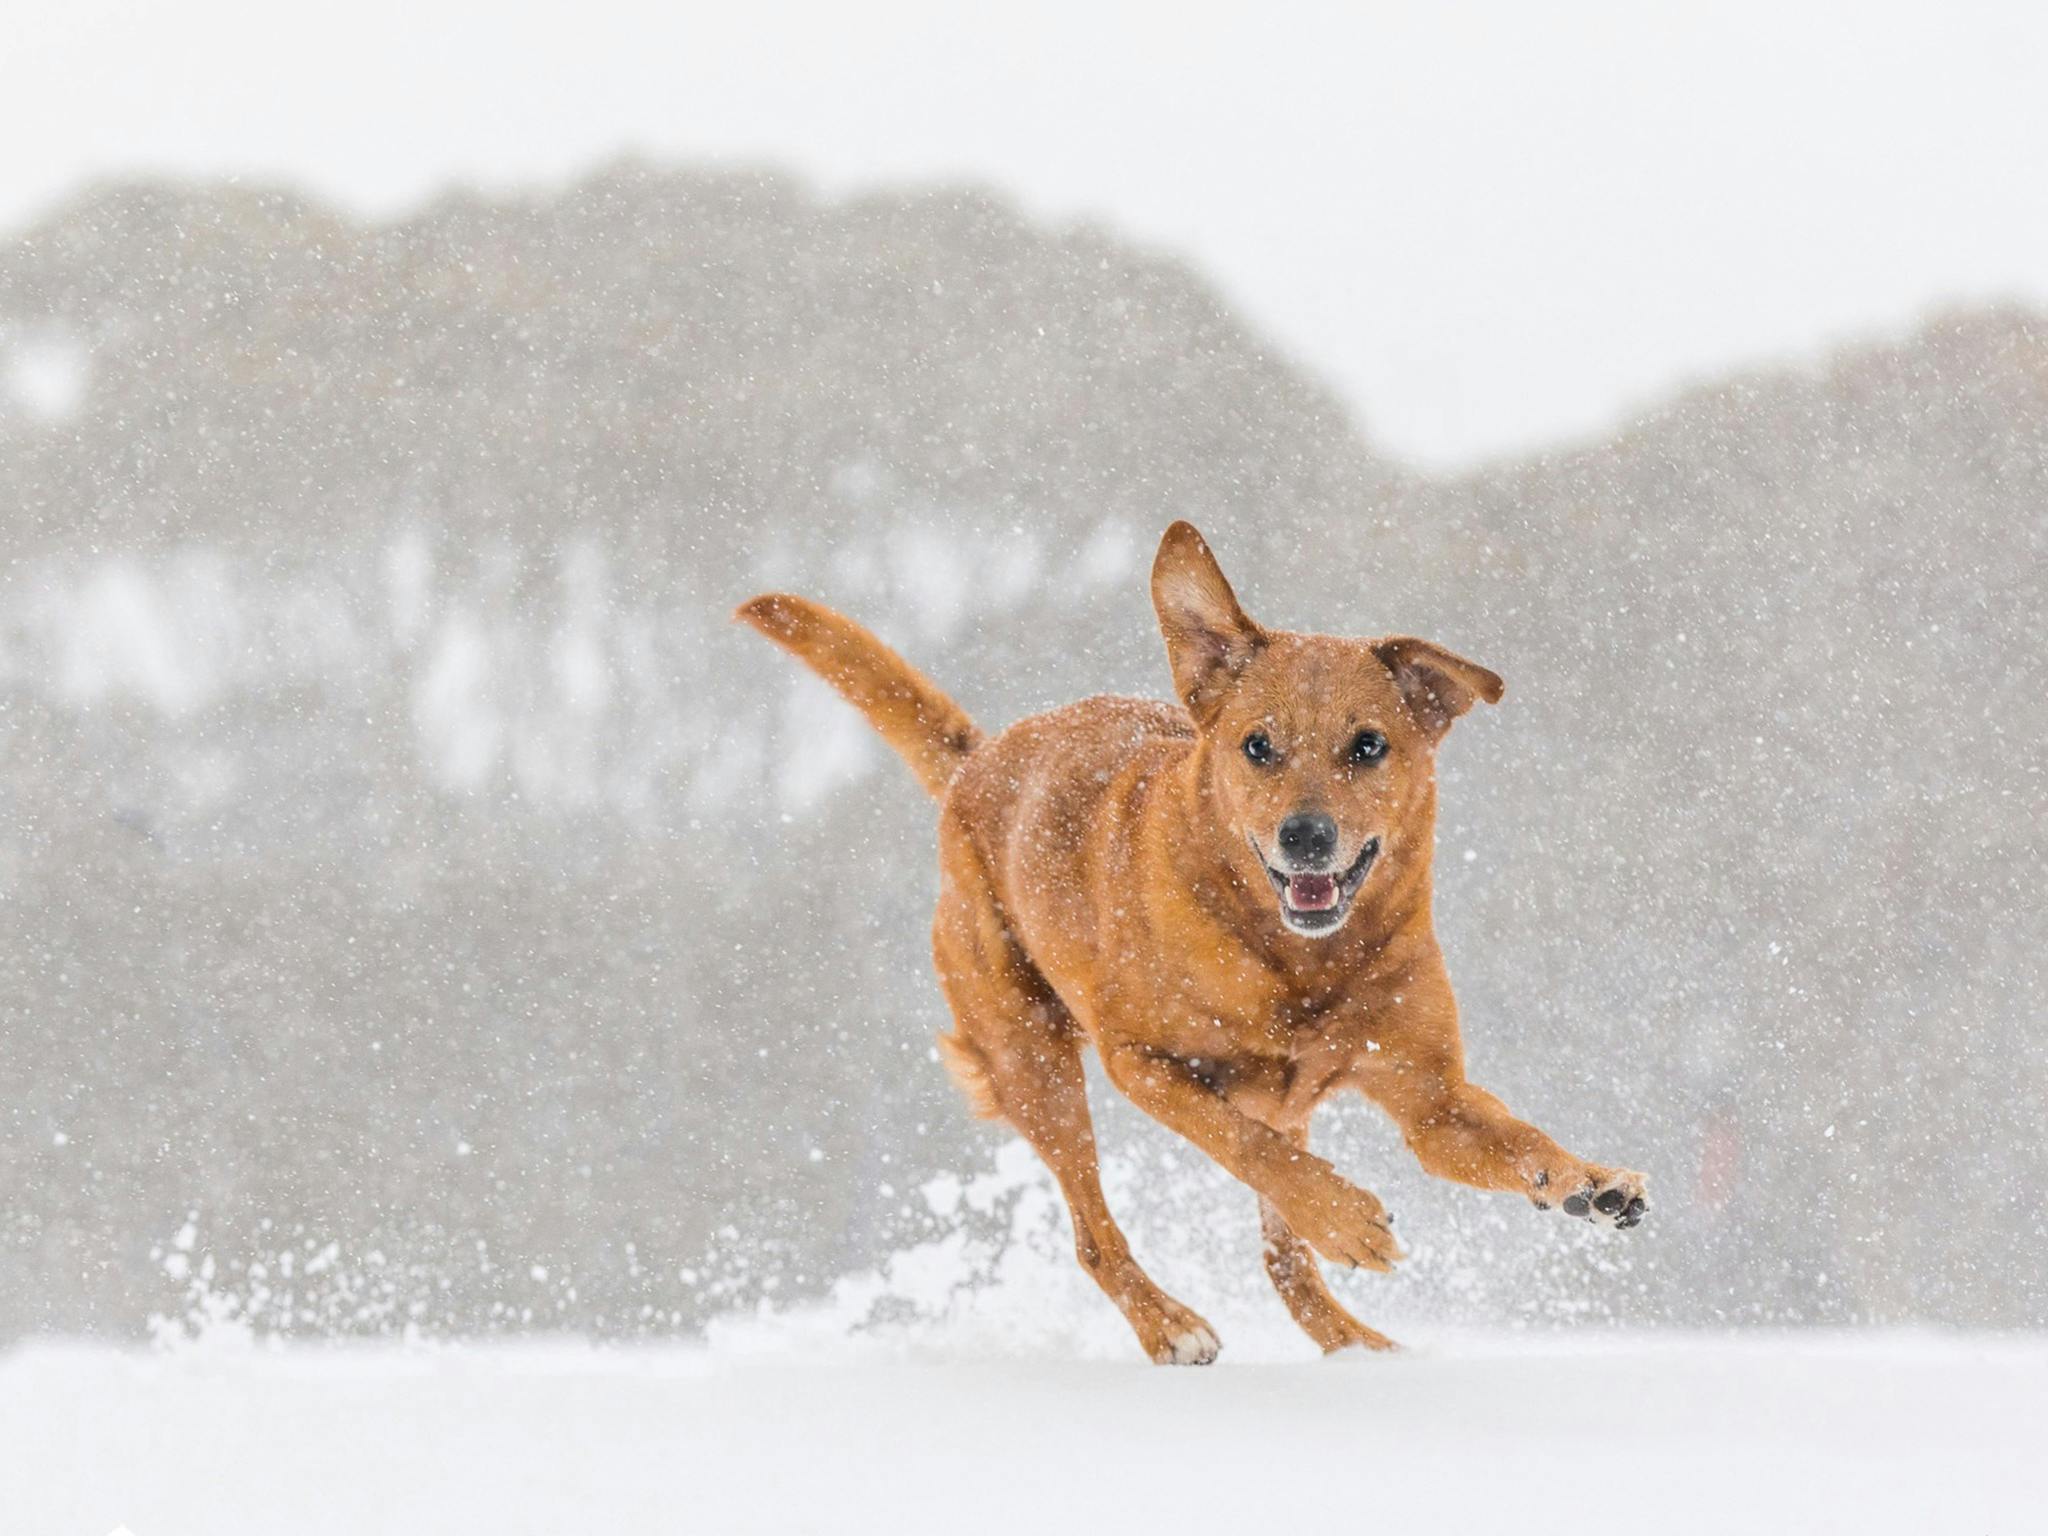 Search and rescue dog Bella from WA having fun in the snow at Dinner Plain